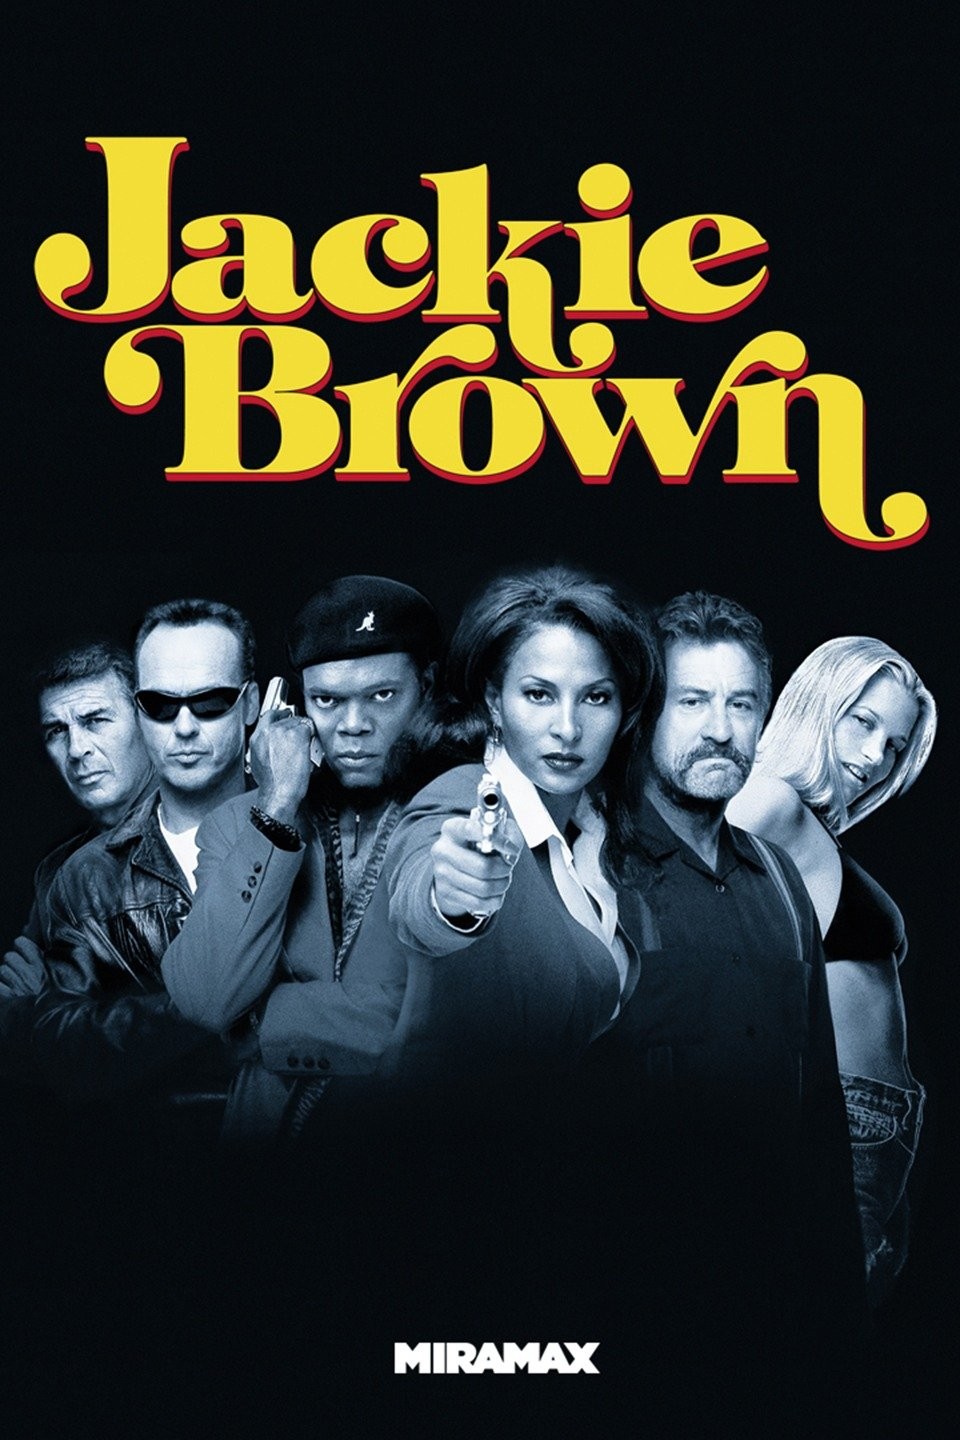 Jackie Brown - Quality Control - Roman Products, LLC